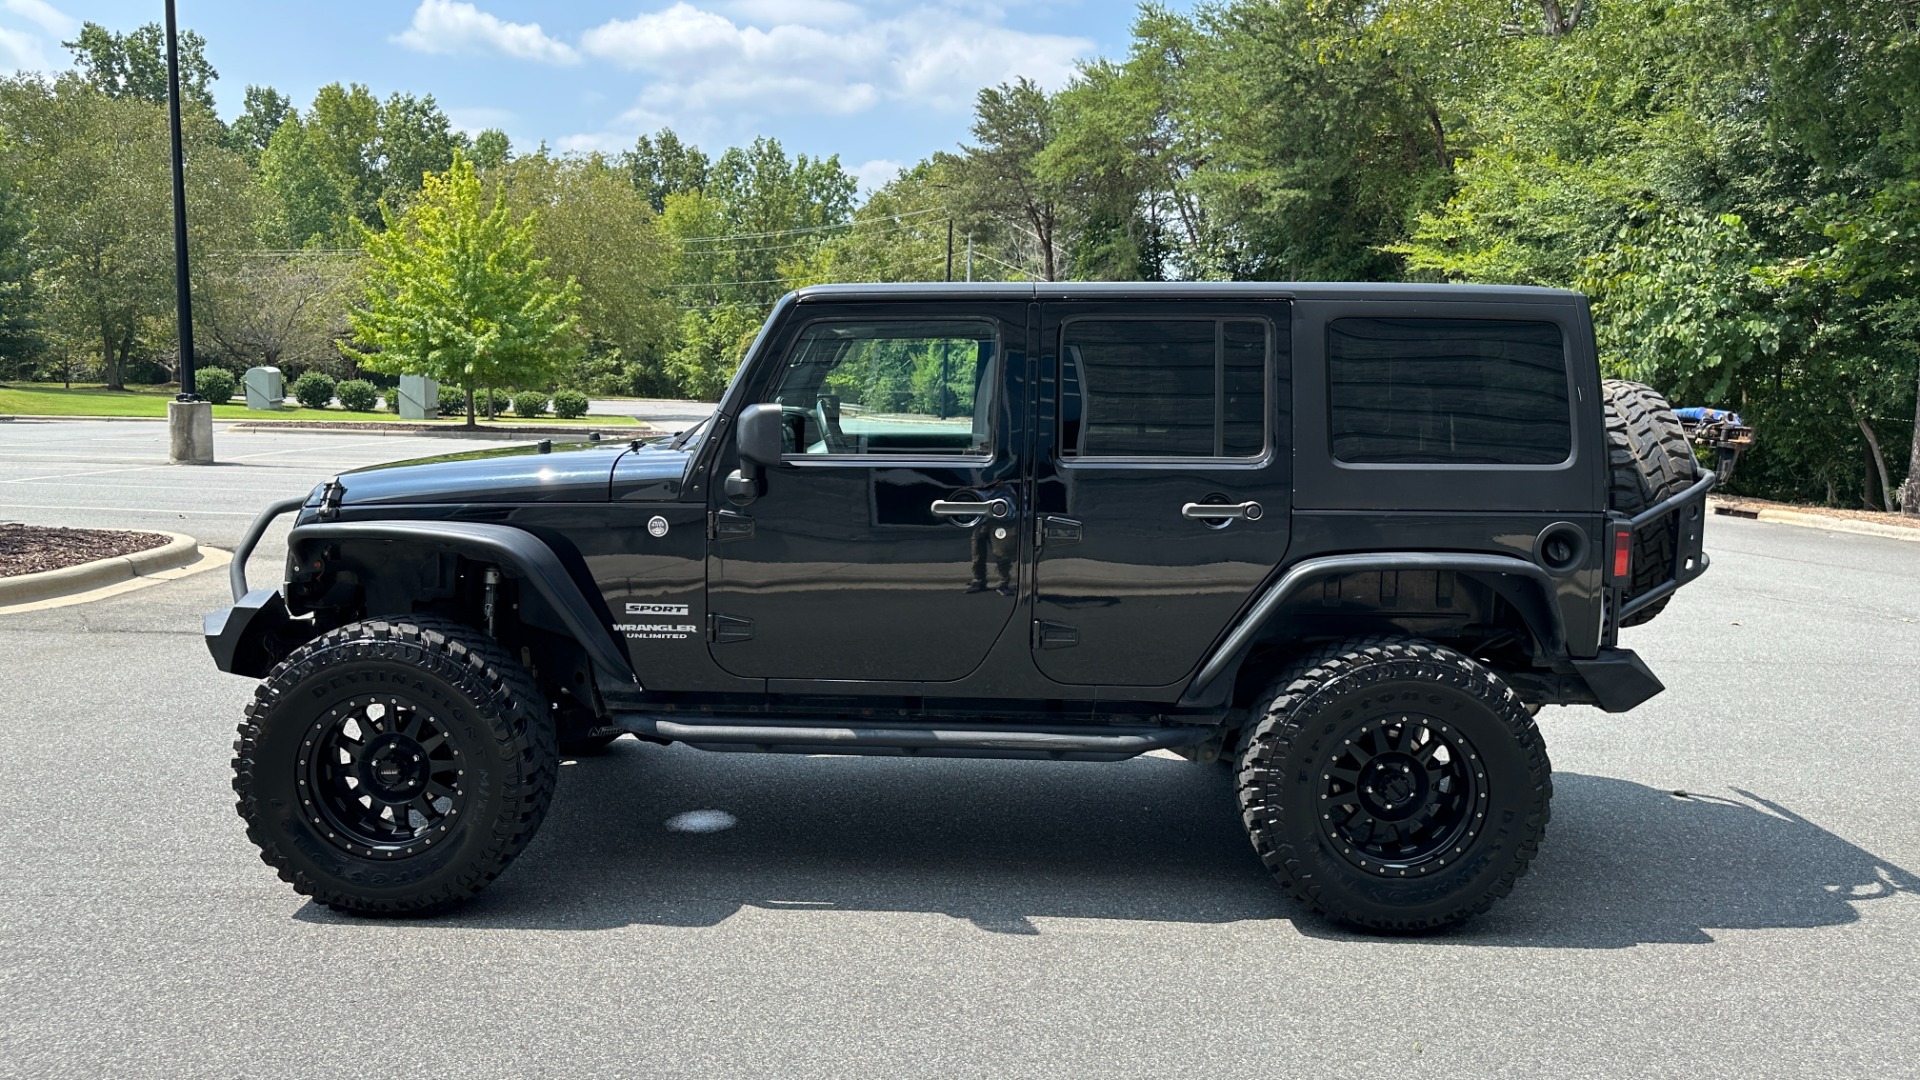 Used 2013 Jeep Wrangler Unlimited Sport / FOX SHOCKS / SOUND SYSTEM / TOUCHSCREEN / SUBWOOFER / TERRAFLEX SUS for sale $24,999 at Formula Imports in Charlotte NC 28227 9